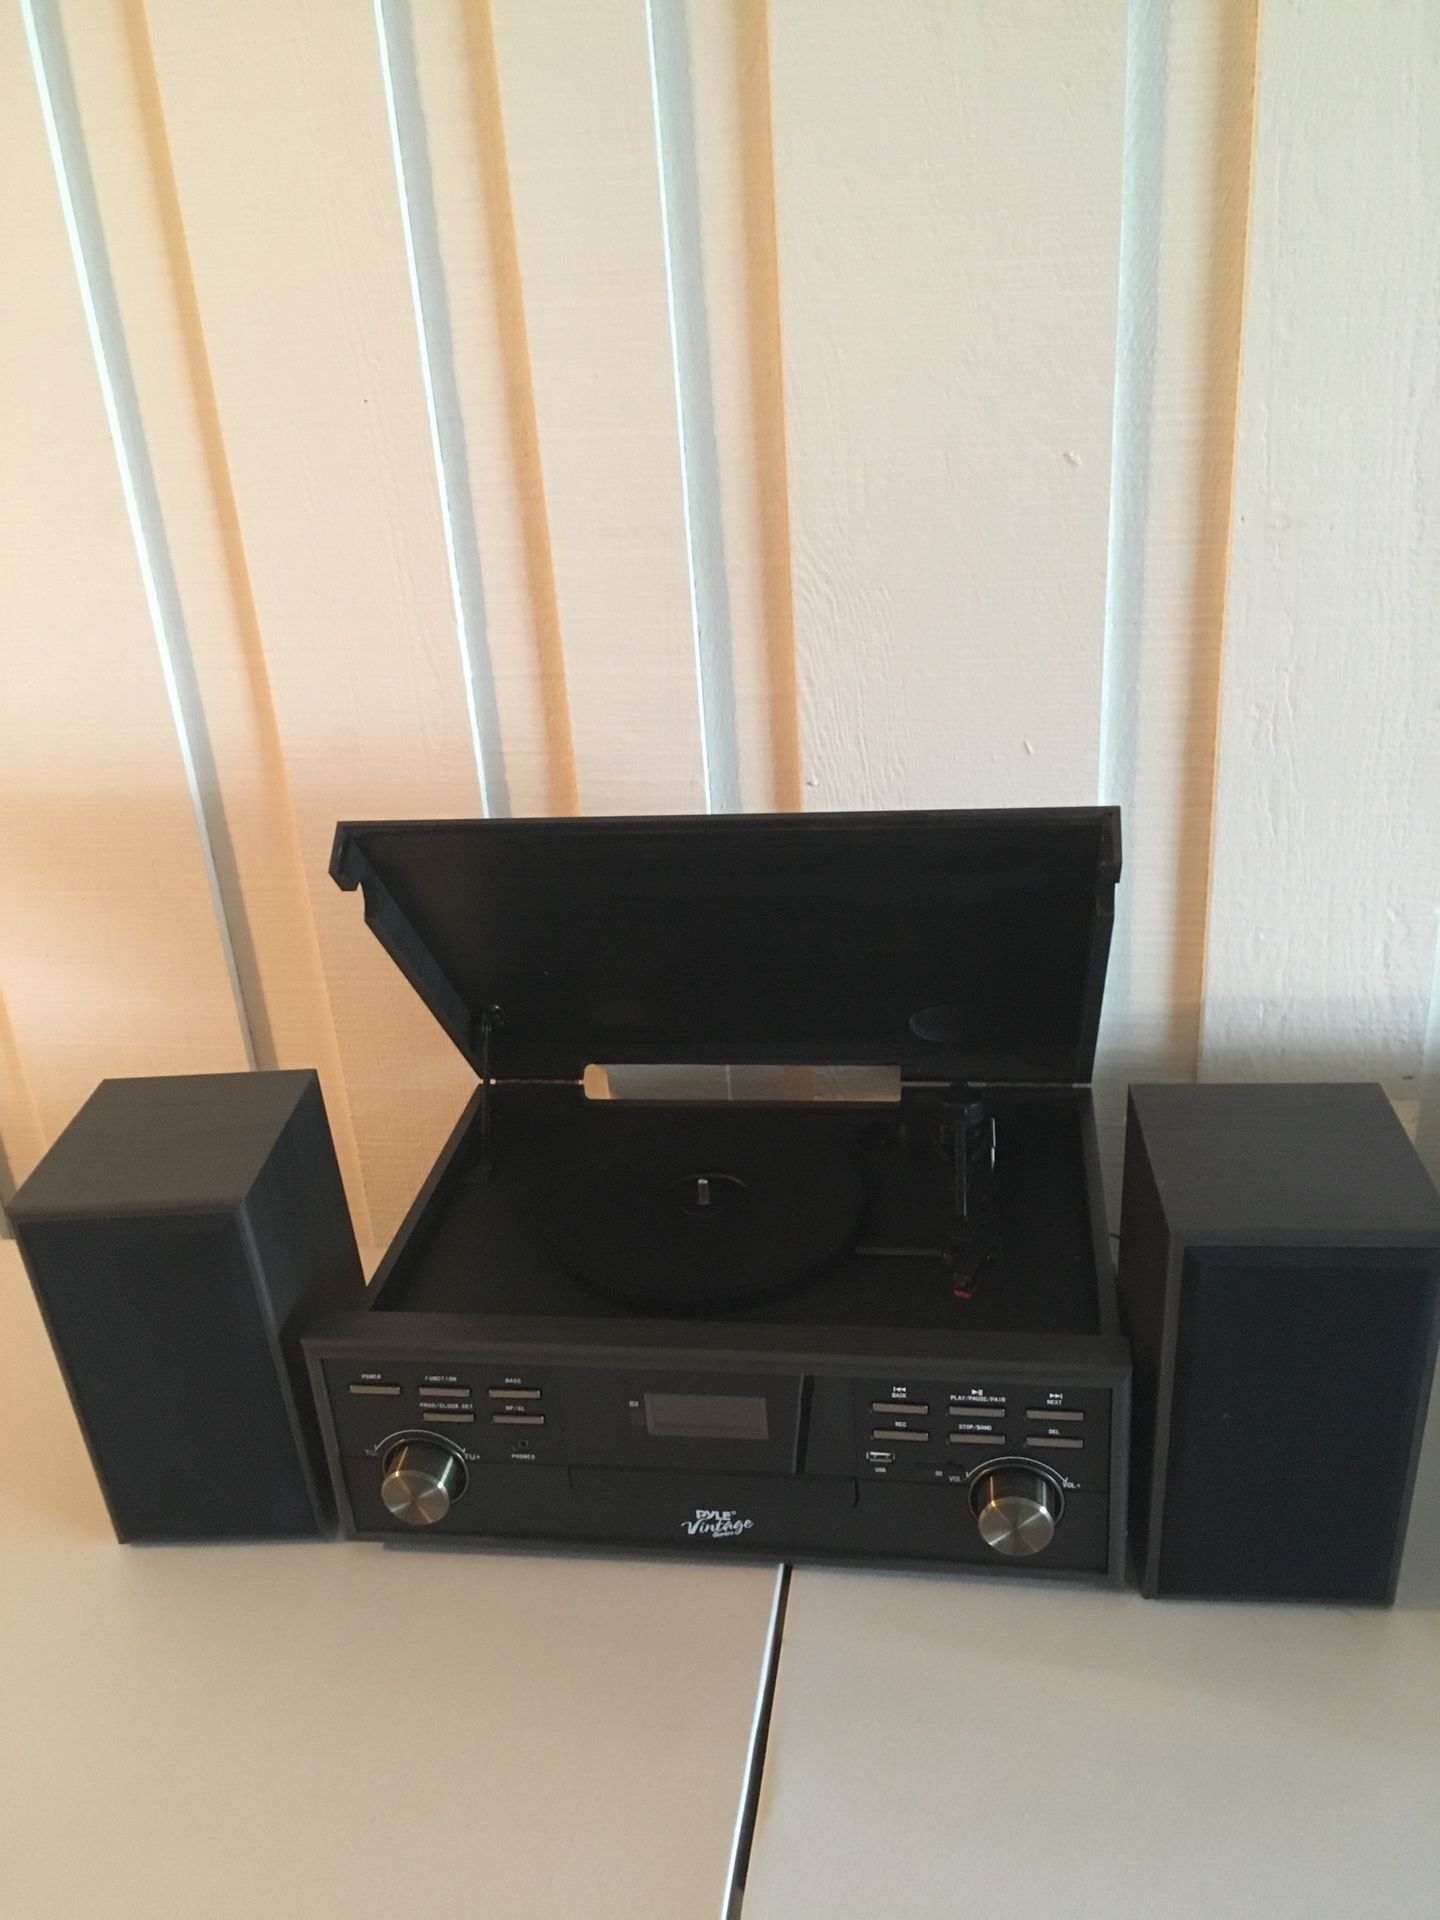 "MUST GO " retro classic “Pyle” stereo system